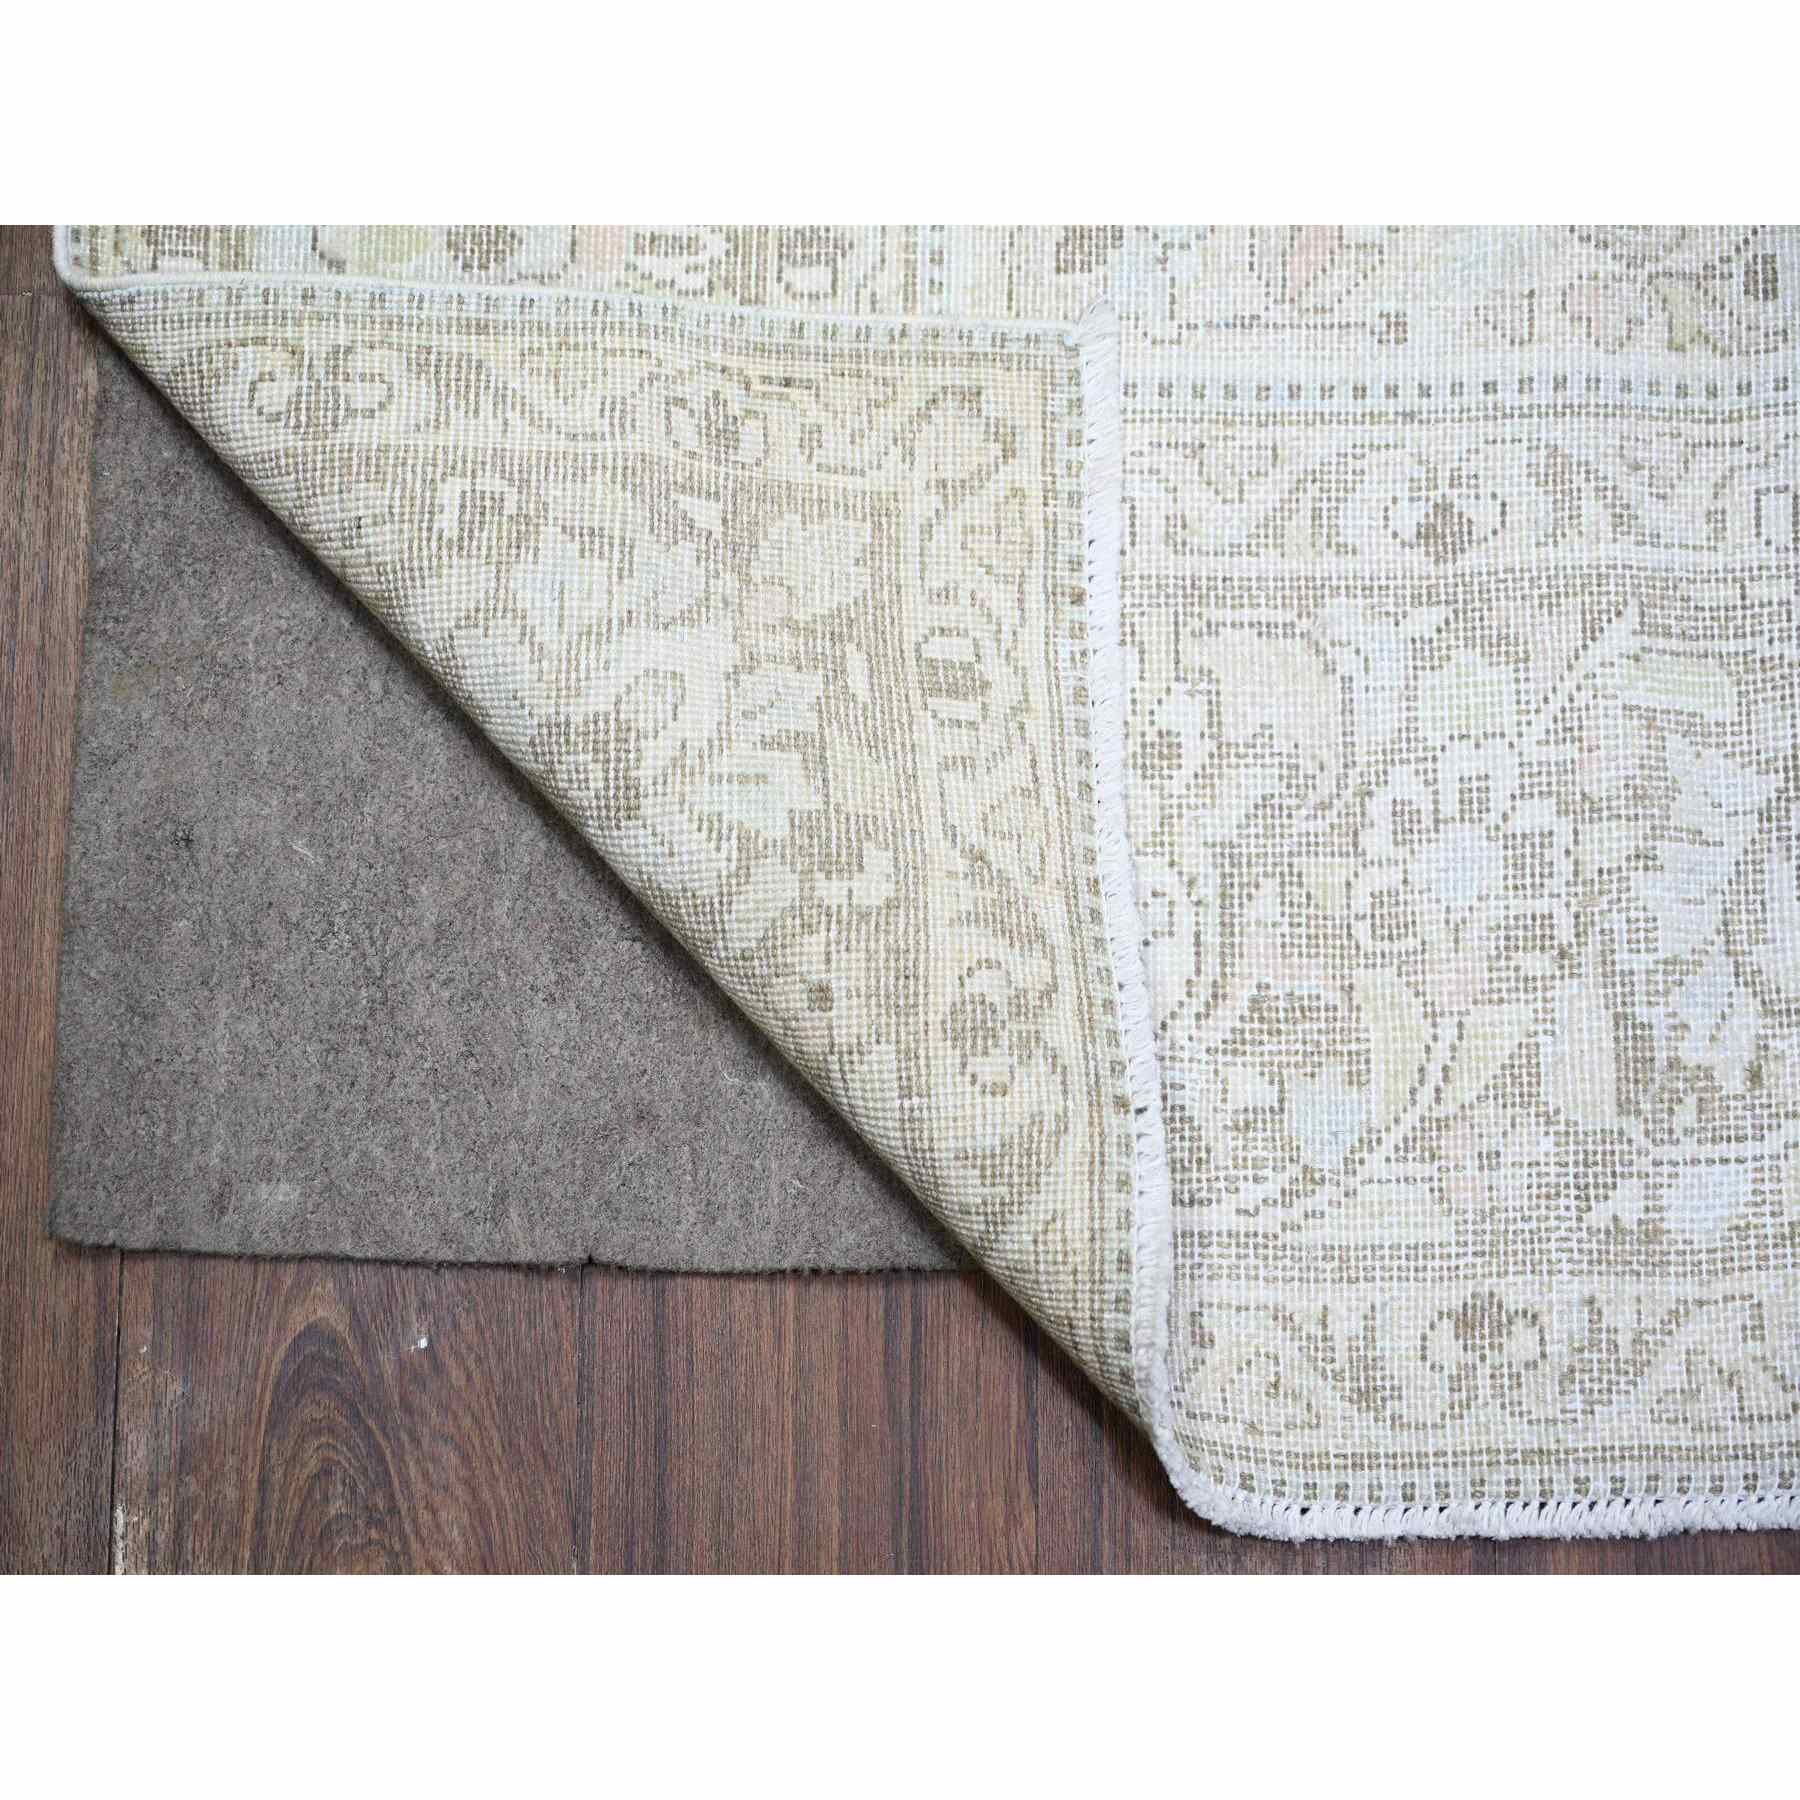 Overdyed-Vintage-Hand-Knotted-Rug-372385